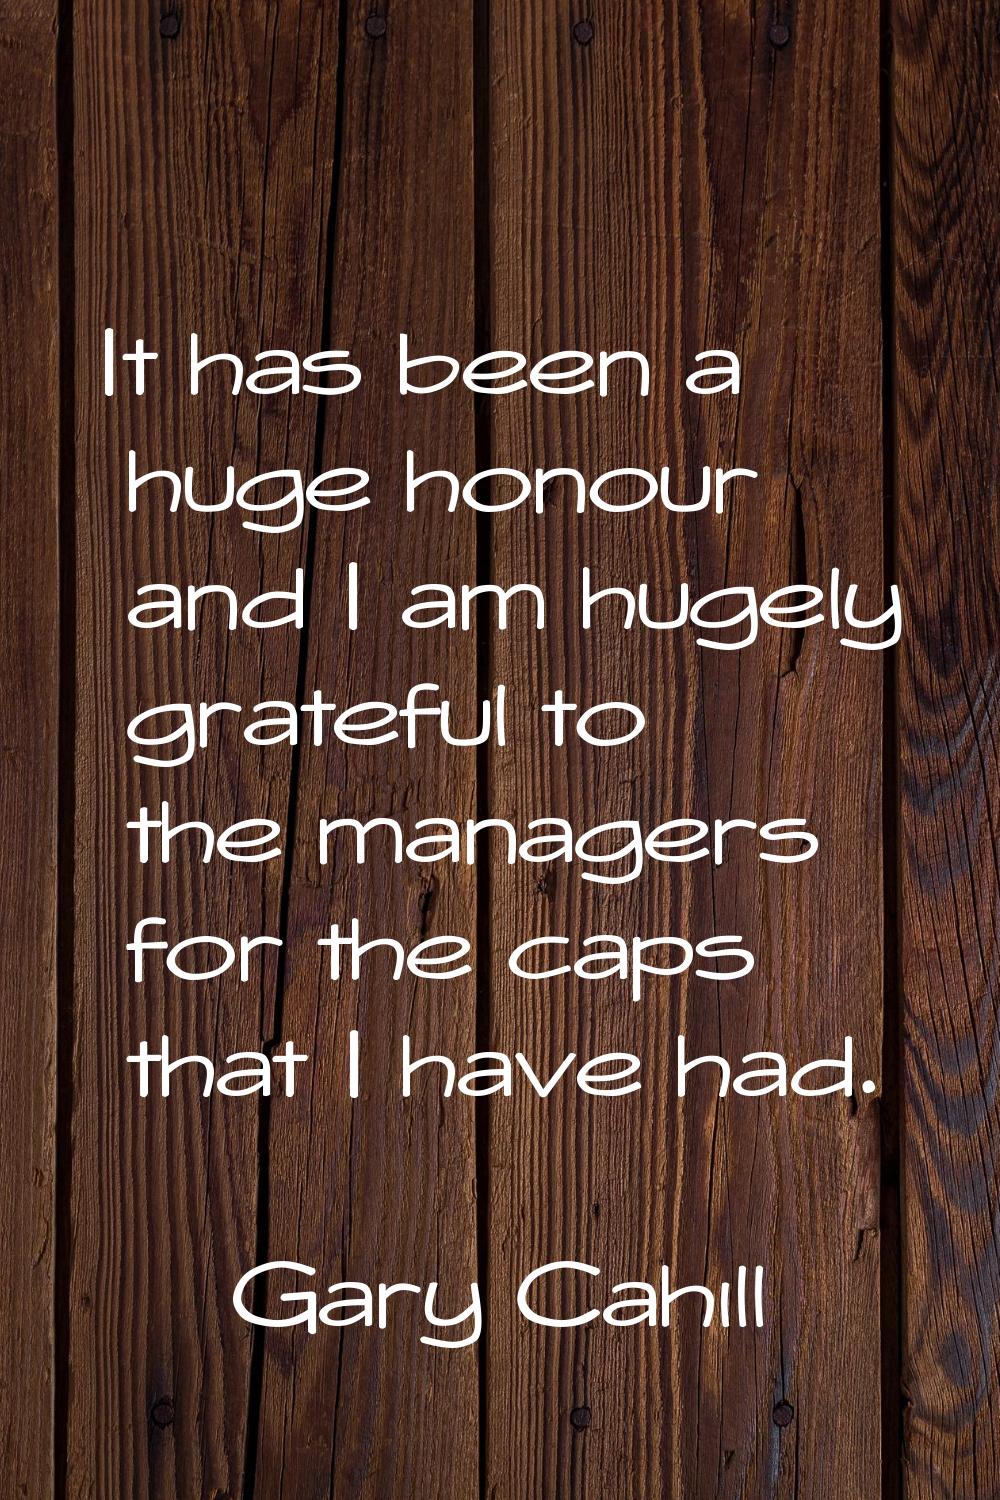 It has been a huge honour and I am hugely grateful to the managers for the caps that I have had.